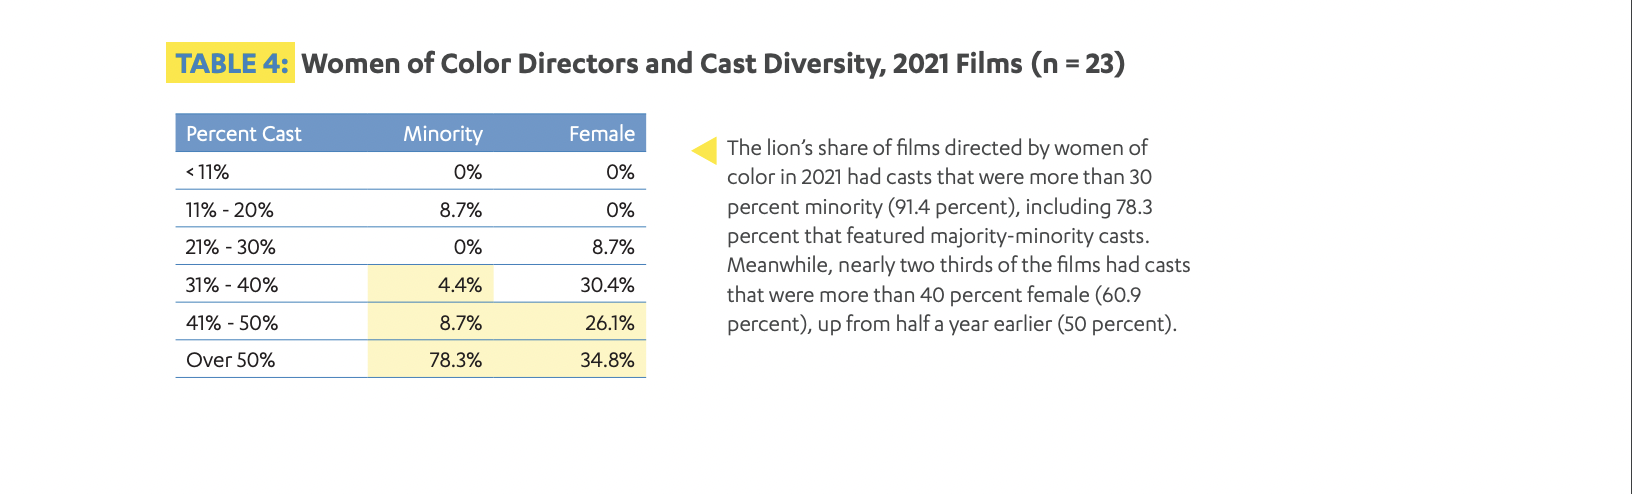 Chart showing women of color directors and cast diversity in 2021